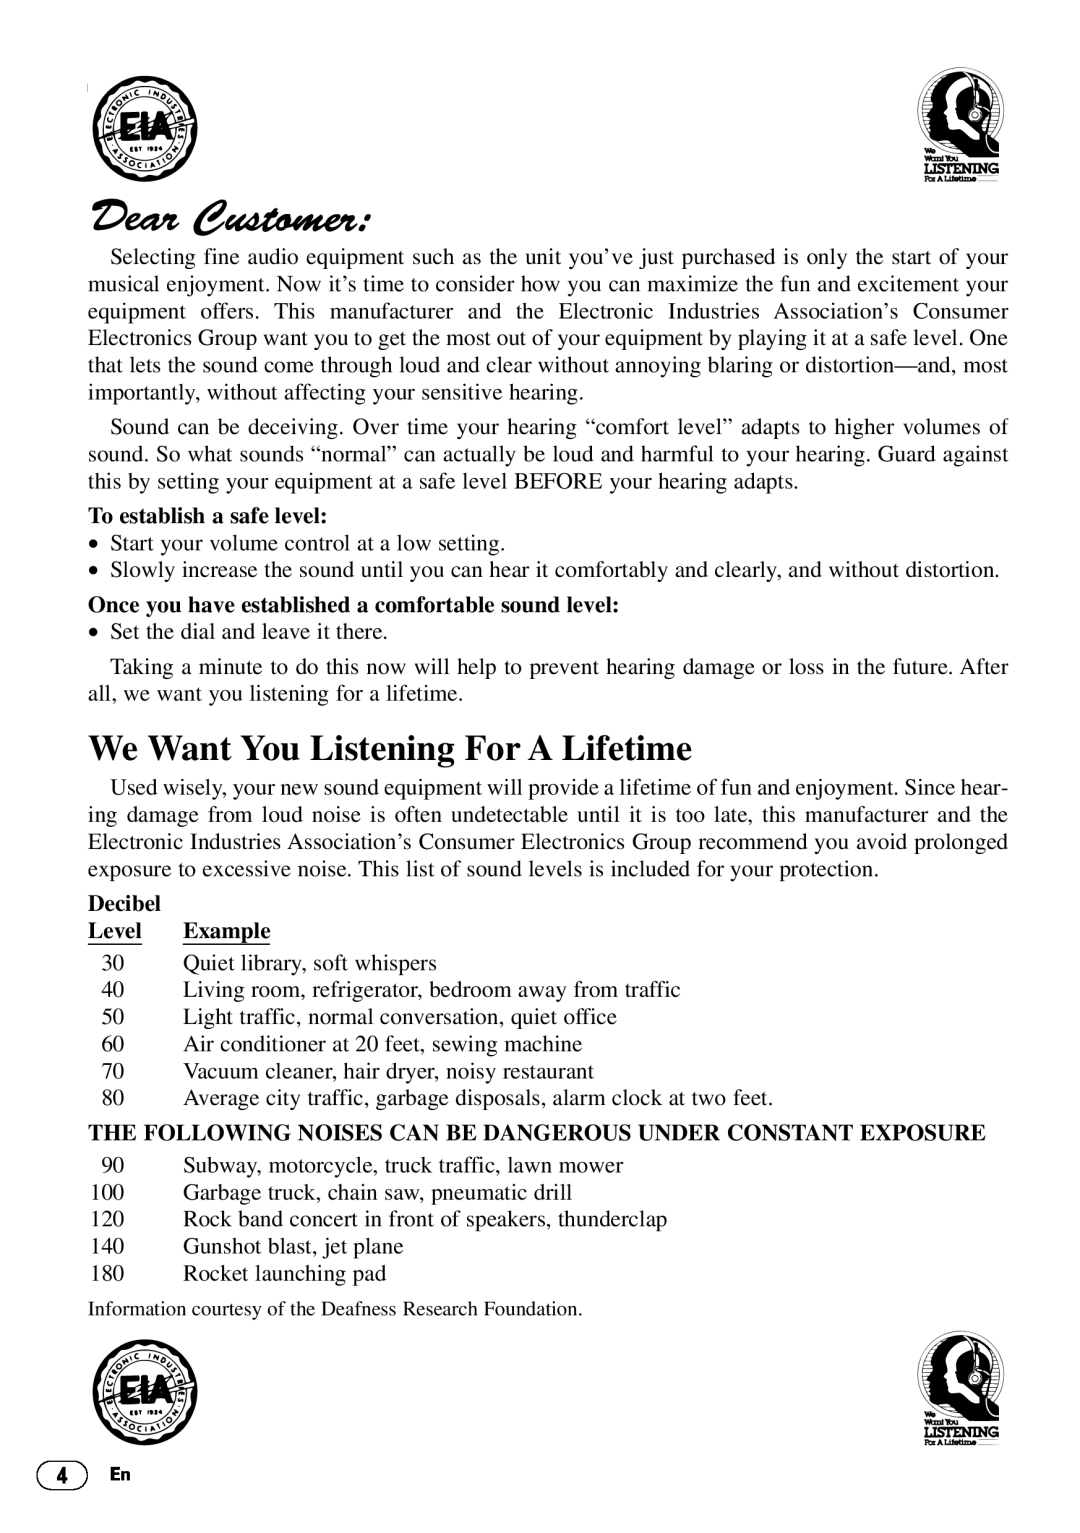 Pioneer DEH-P4400 operation manual We Want You Listening For A Lifetime, To establish a safe level, Decibel Level Example 